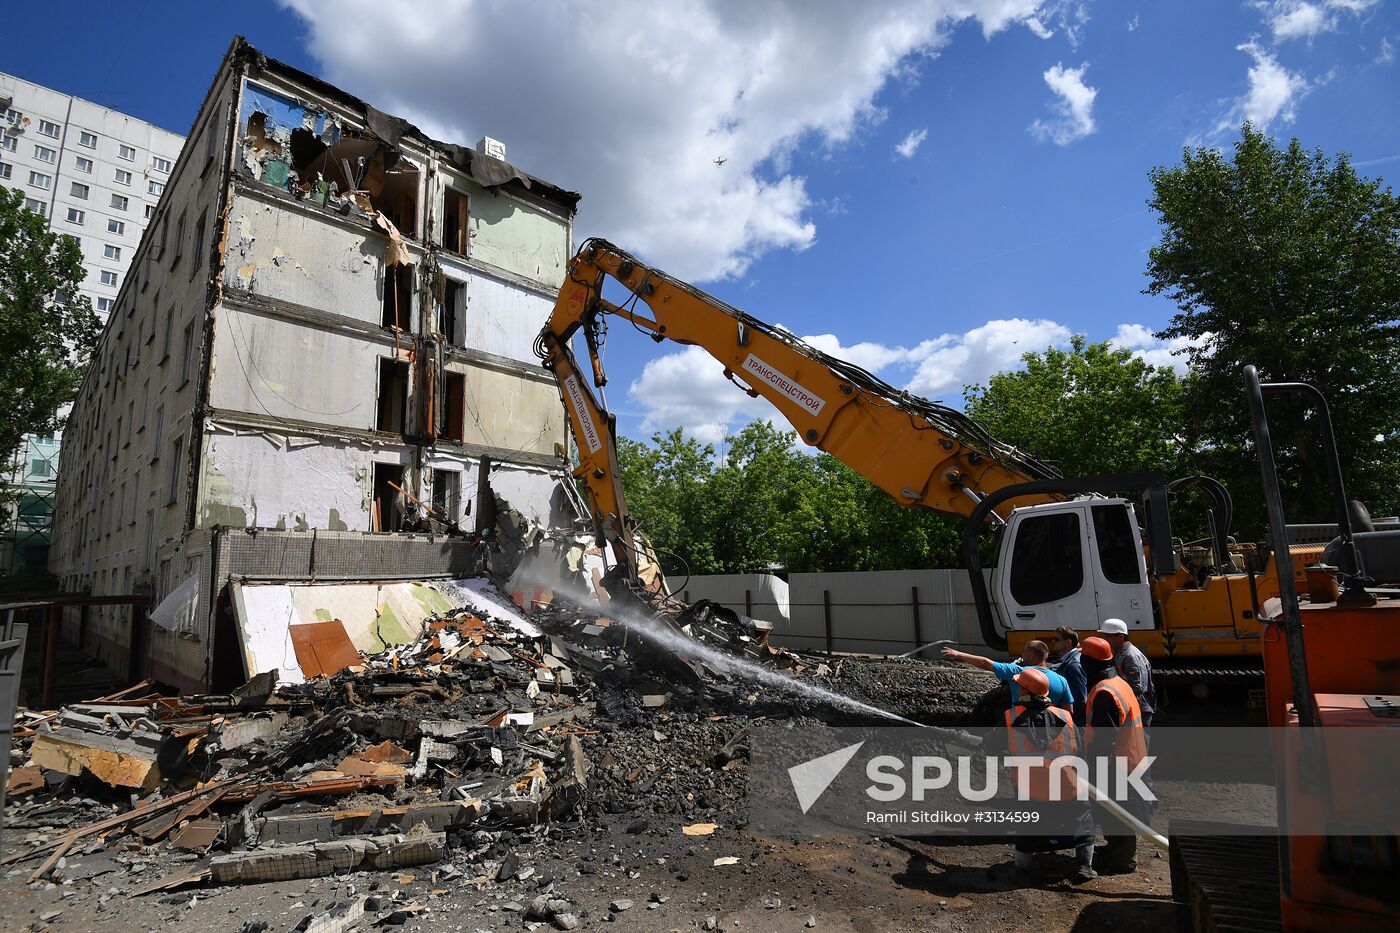 Moscow's last K-7 series five-story building demolished